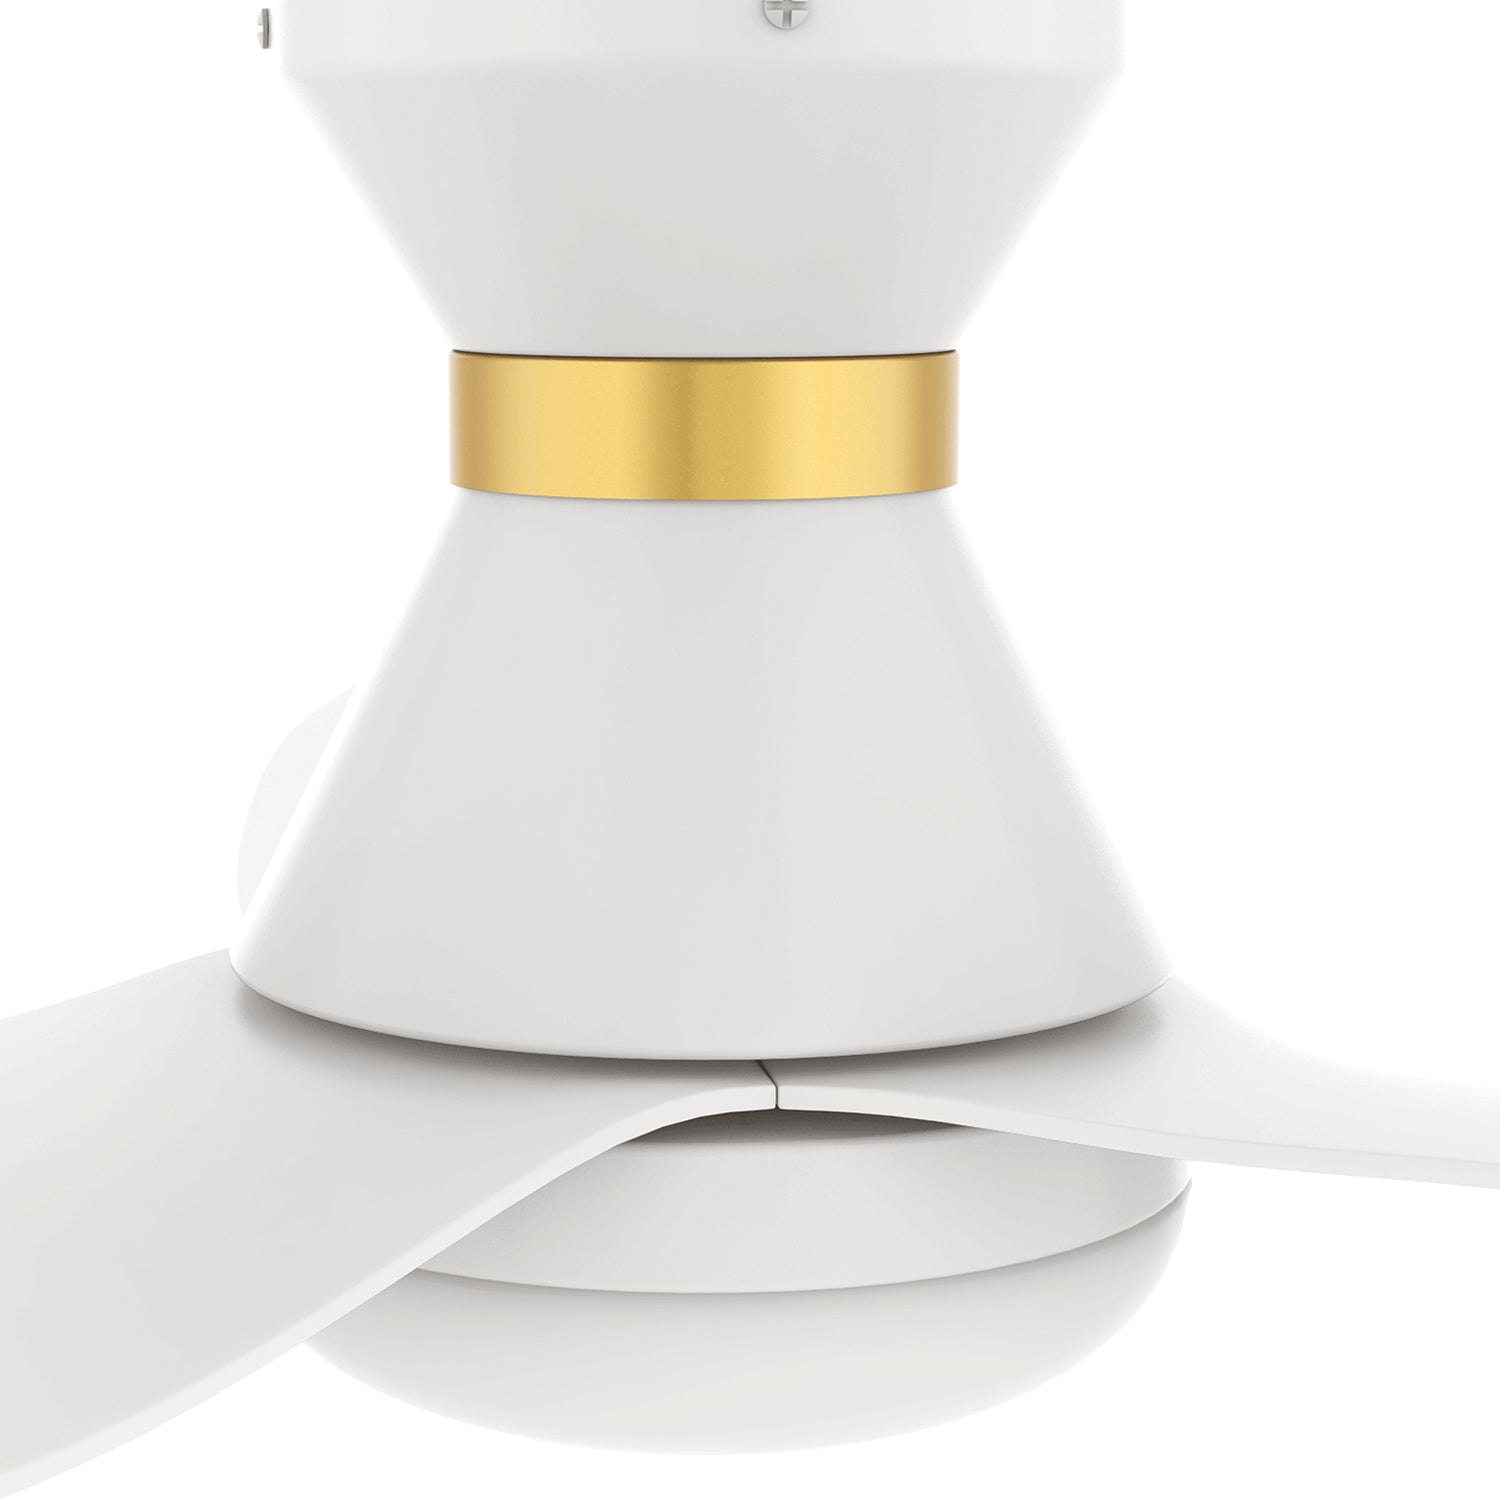 The Joliet Smart Ceiling Fan with 3 blades and a 45-inch blade sweep with a swift modern appearance. Its compact size is perfect for smaller bedrooms. It is made of a strong and durable ABS material in an all White finish. The 4000k LED light kit is dimmable and can change between bright white and warm soft light temperatures. The fan features Remote control, Wi-Fi apps, Siri Shortcut and Voice control technology (compatible with Amazon Alexa and Google Home Assistant ) to set fan preferences.